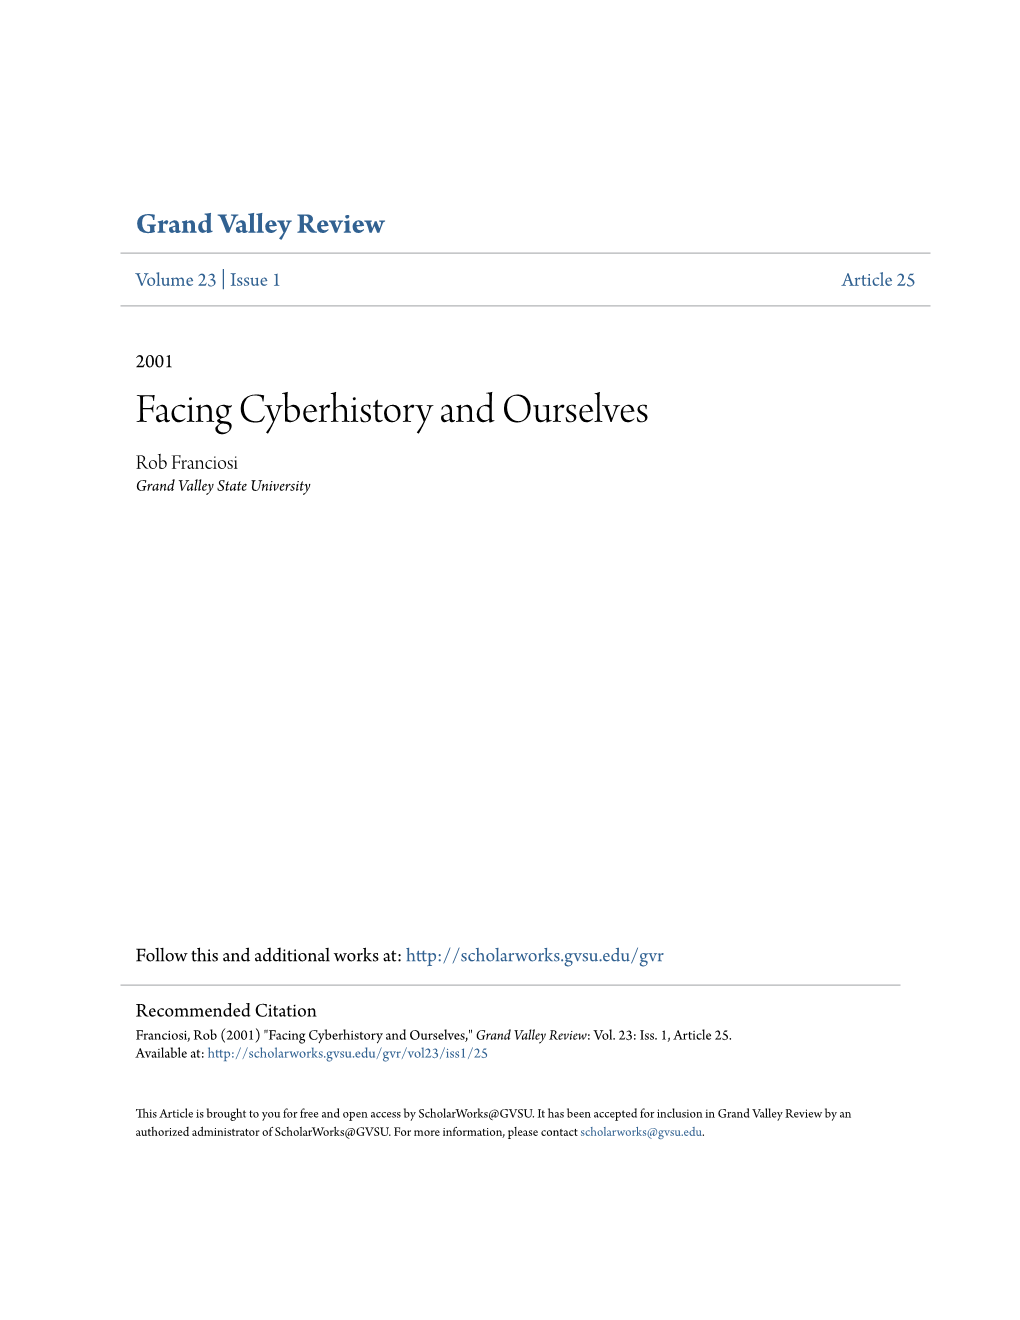 Facing Cyberhistory and Ourselves Rob Franciosi Grand Valley State University